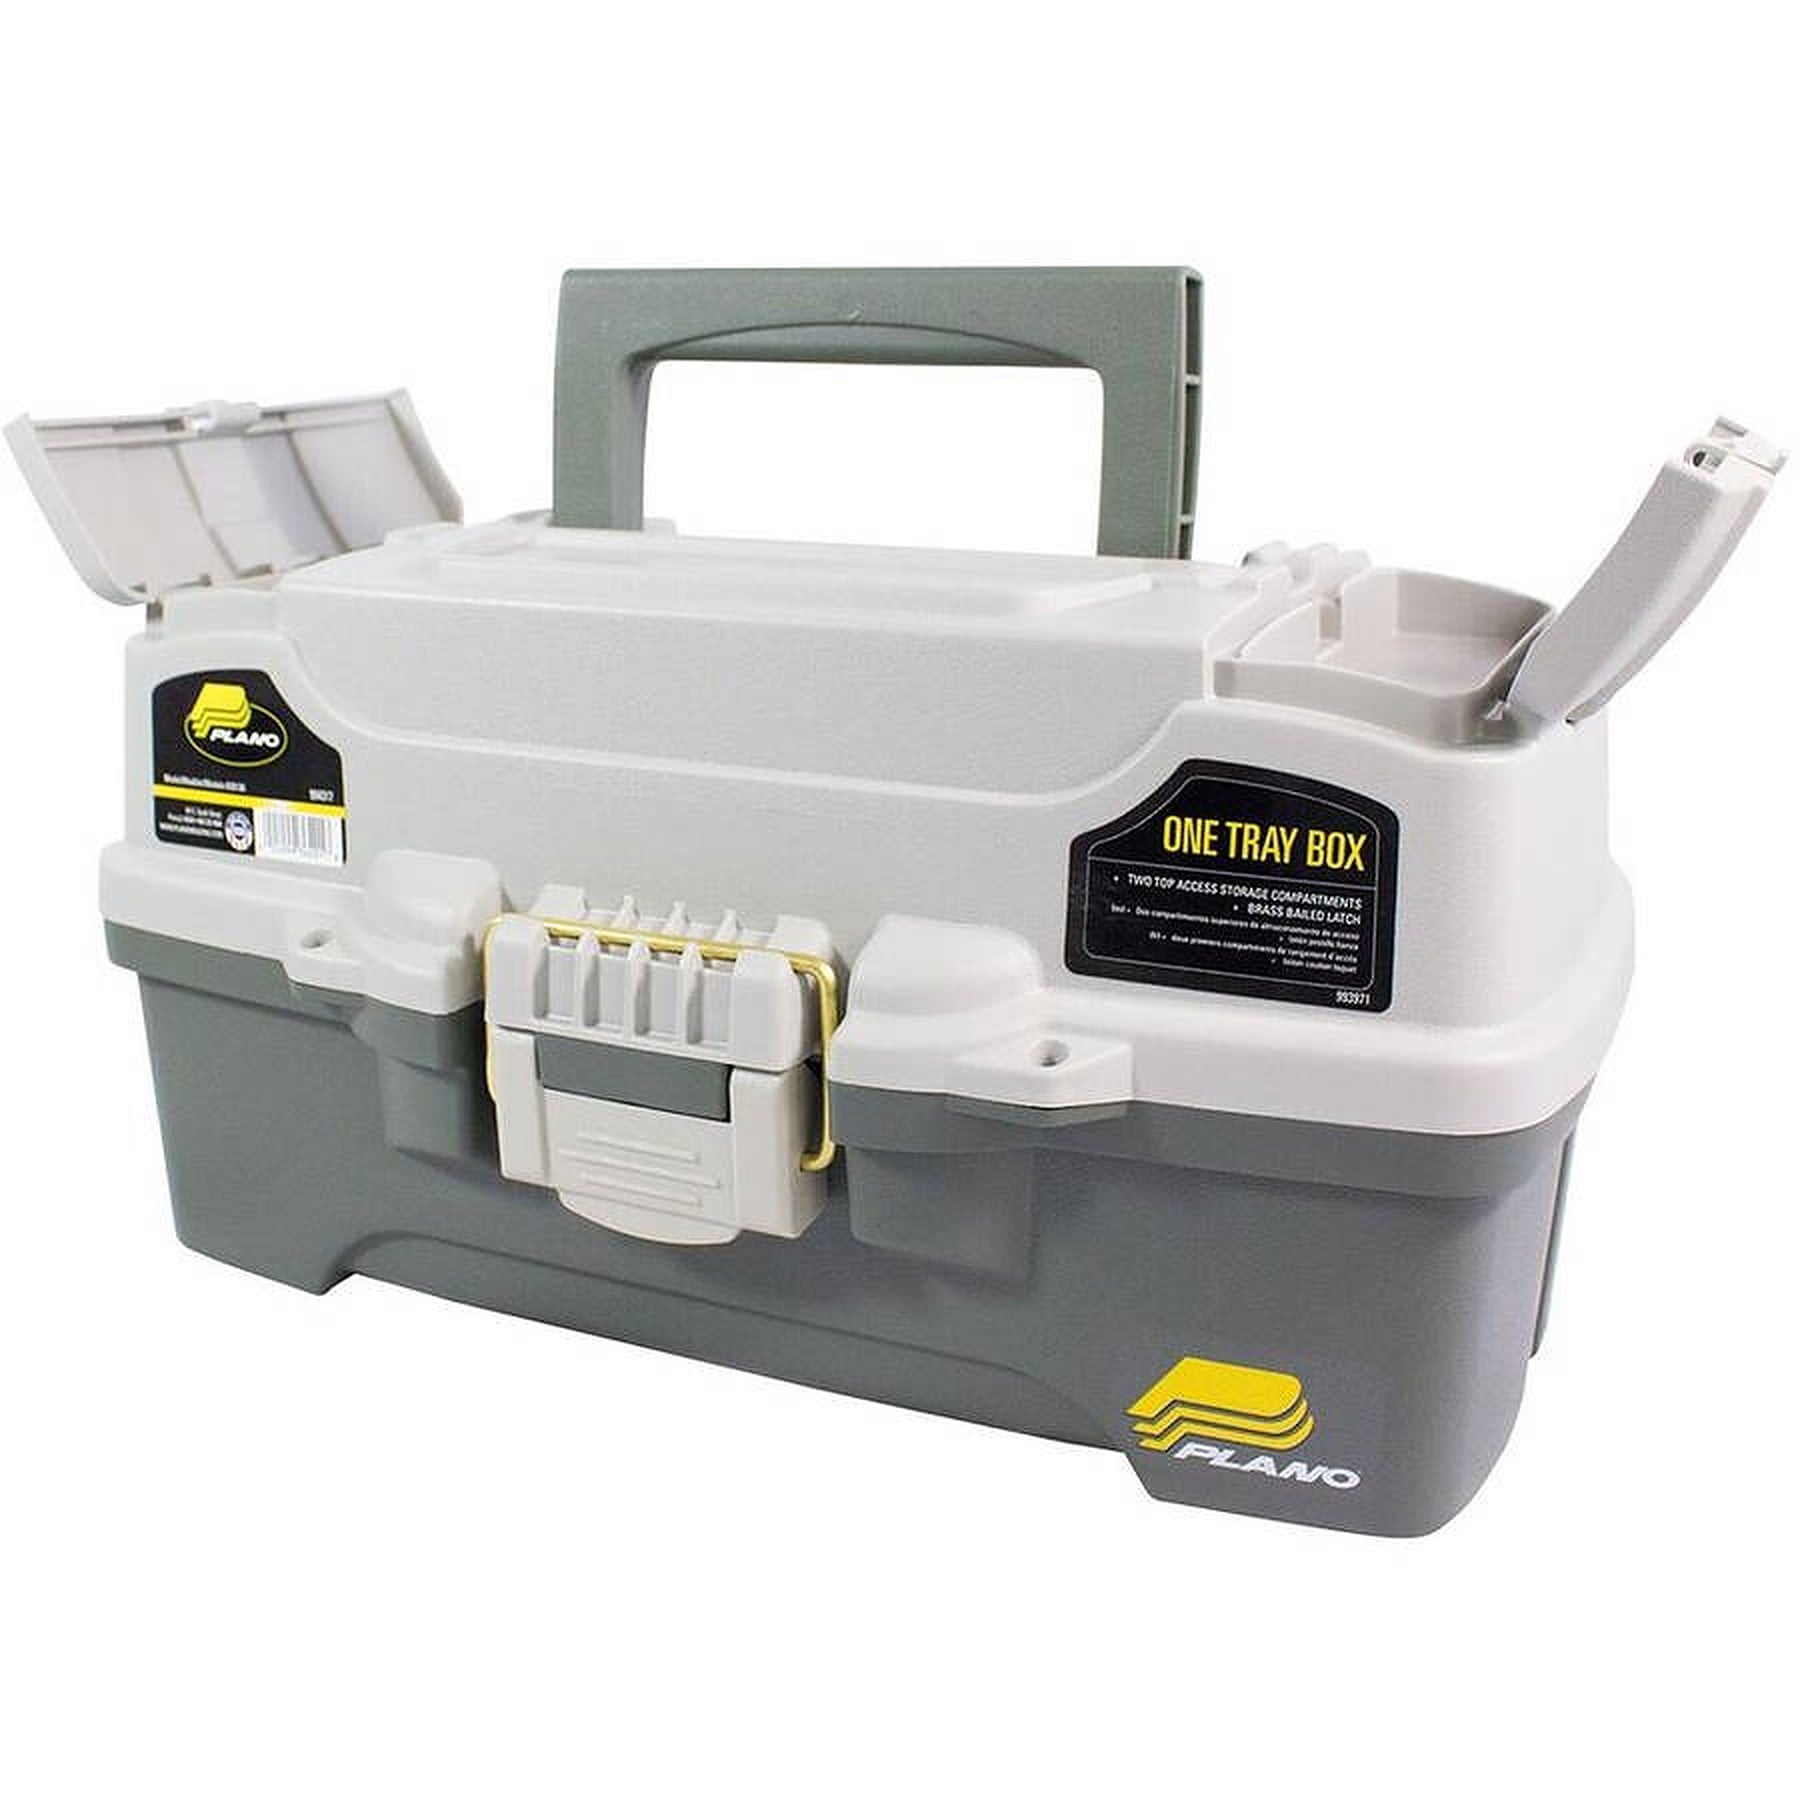 Plano 6201 One-Tray Tackle Box, Bait Storage, Extending Cantilever